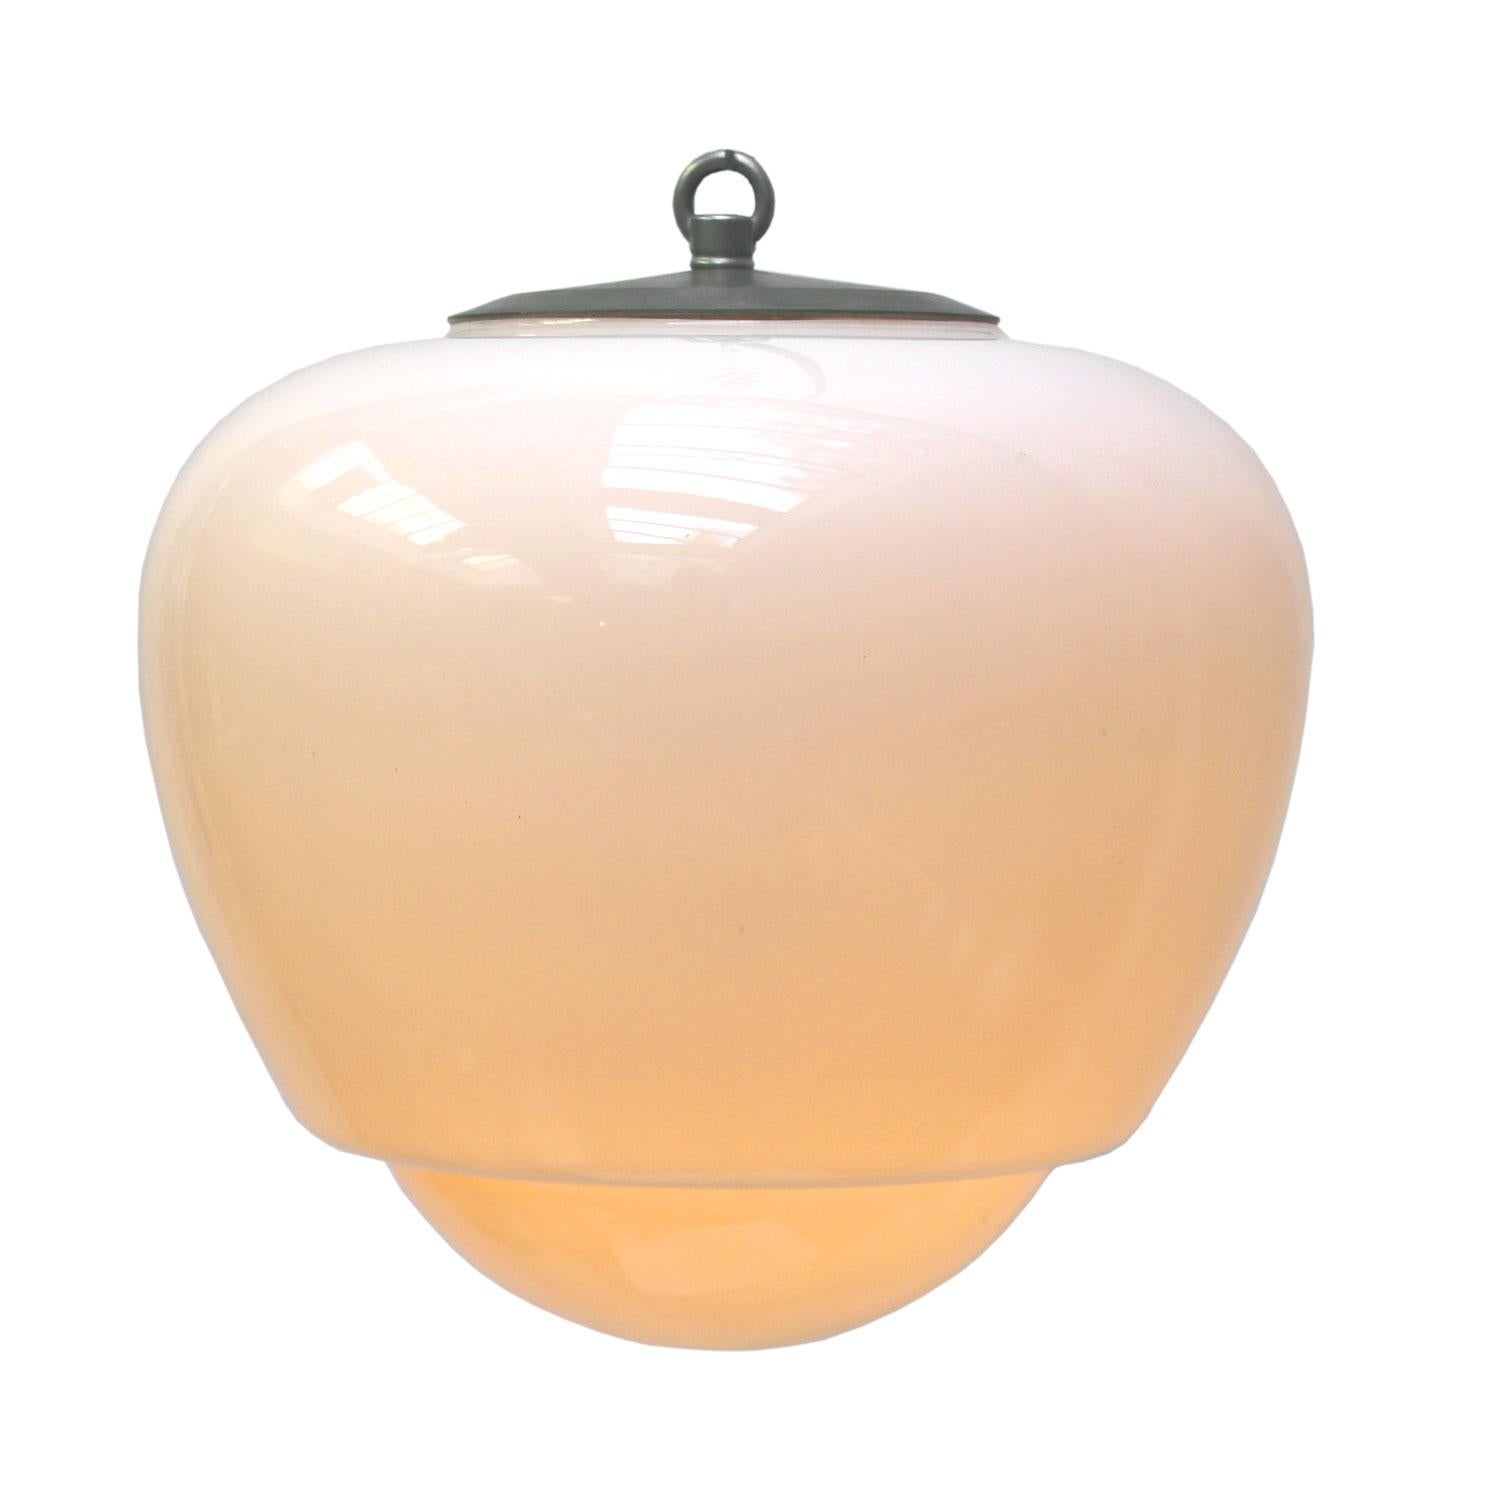 Opaline glass pendant.
2 meter black wire

Weight: 2.00 kg / 4.4 lb

Priced per individual item. All lamps have been made suitable by international standards for incandescent light bulbs, energy-efficient and LED bulbs. E26/E27 bulb holders and